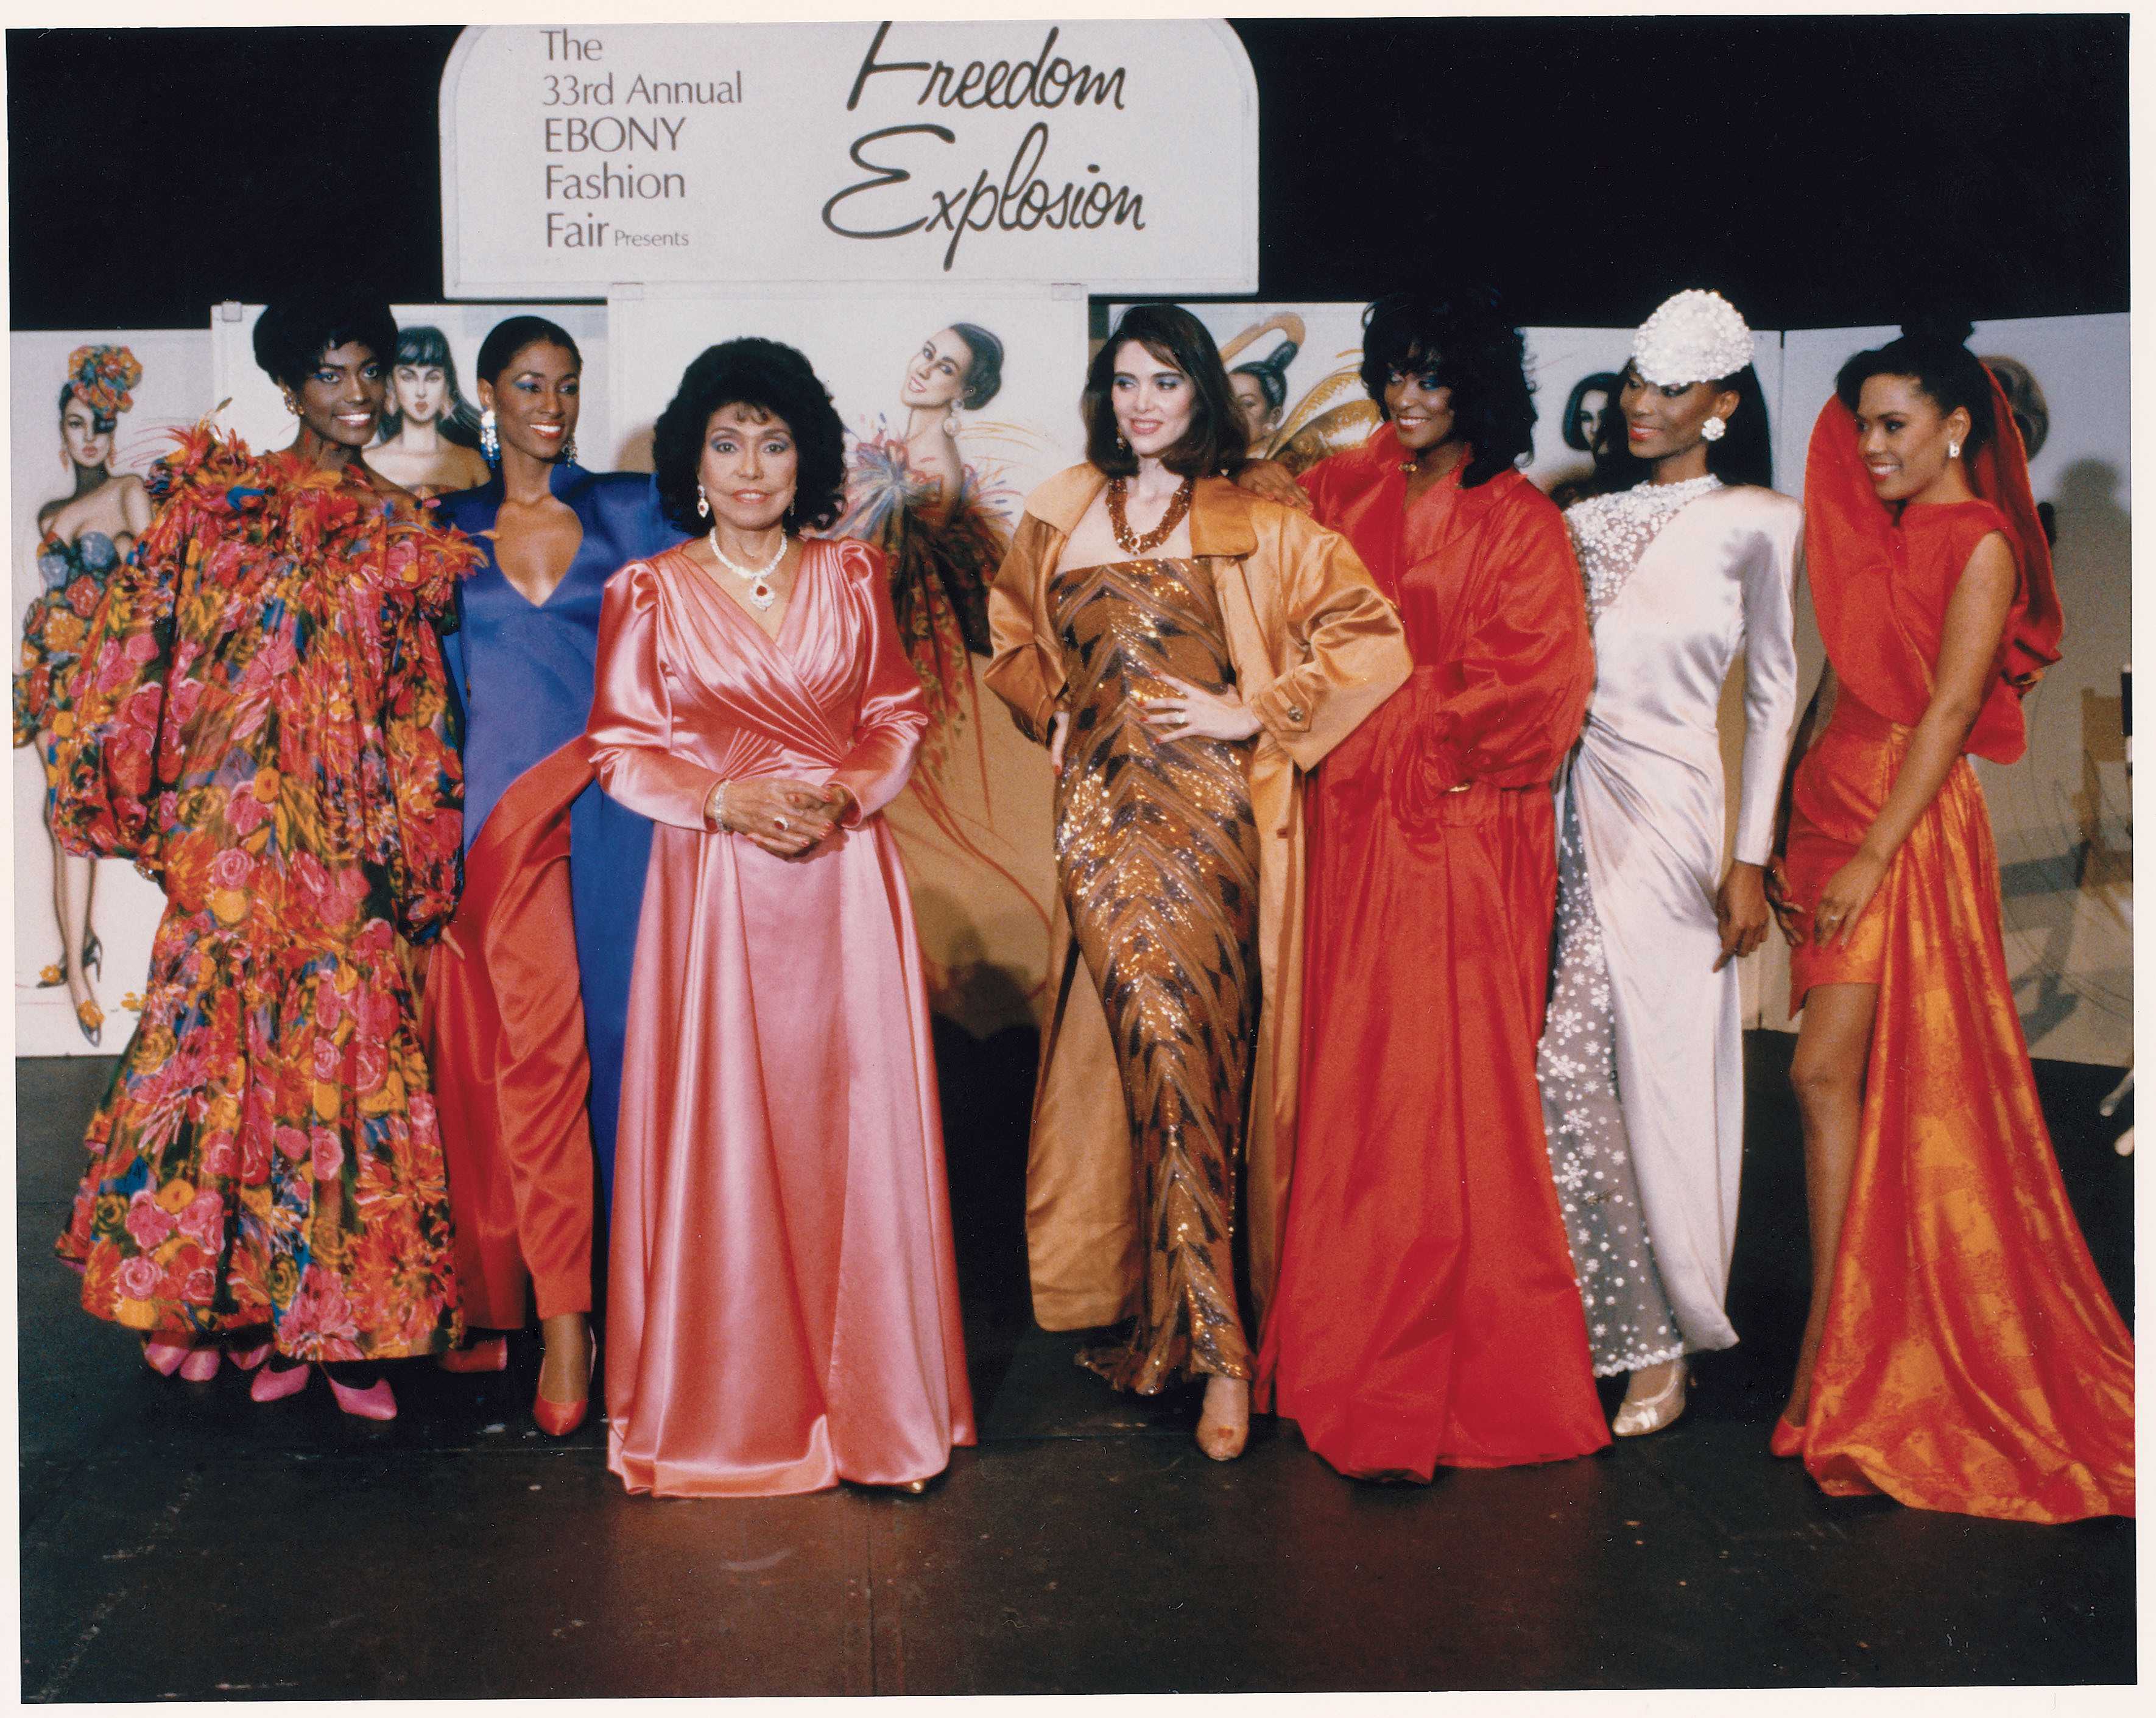 Photograph of Eunice Walker Johnson and other models dressed in formal wear